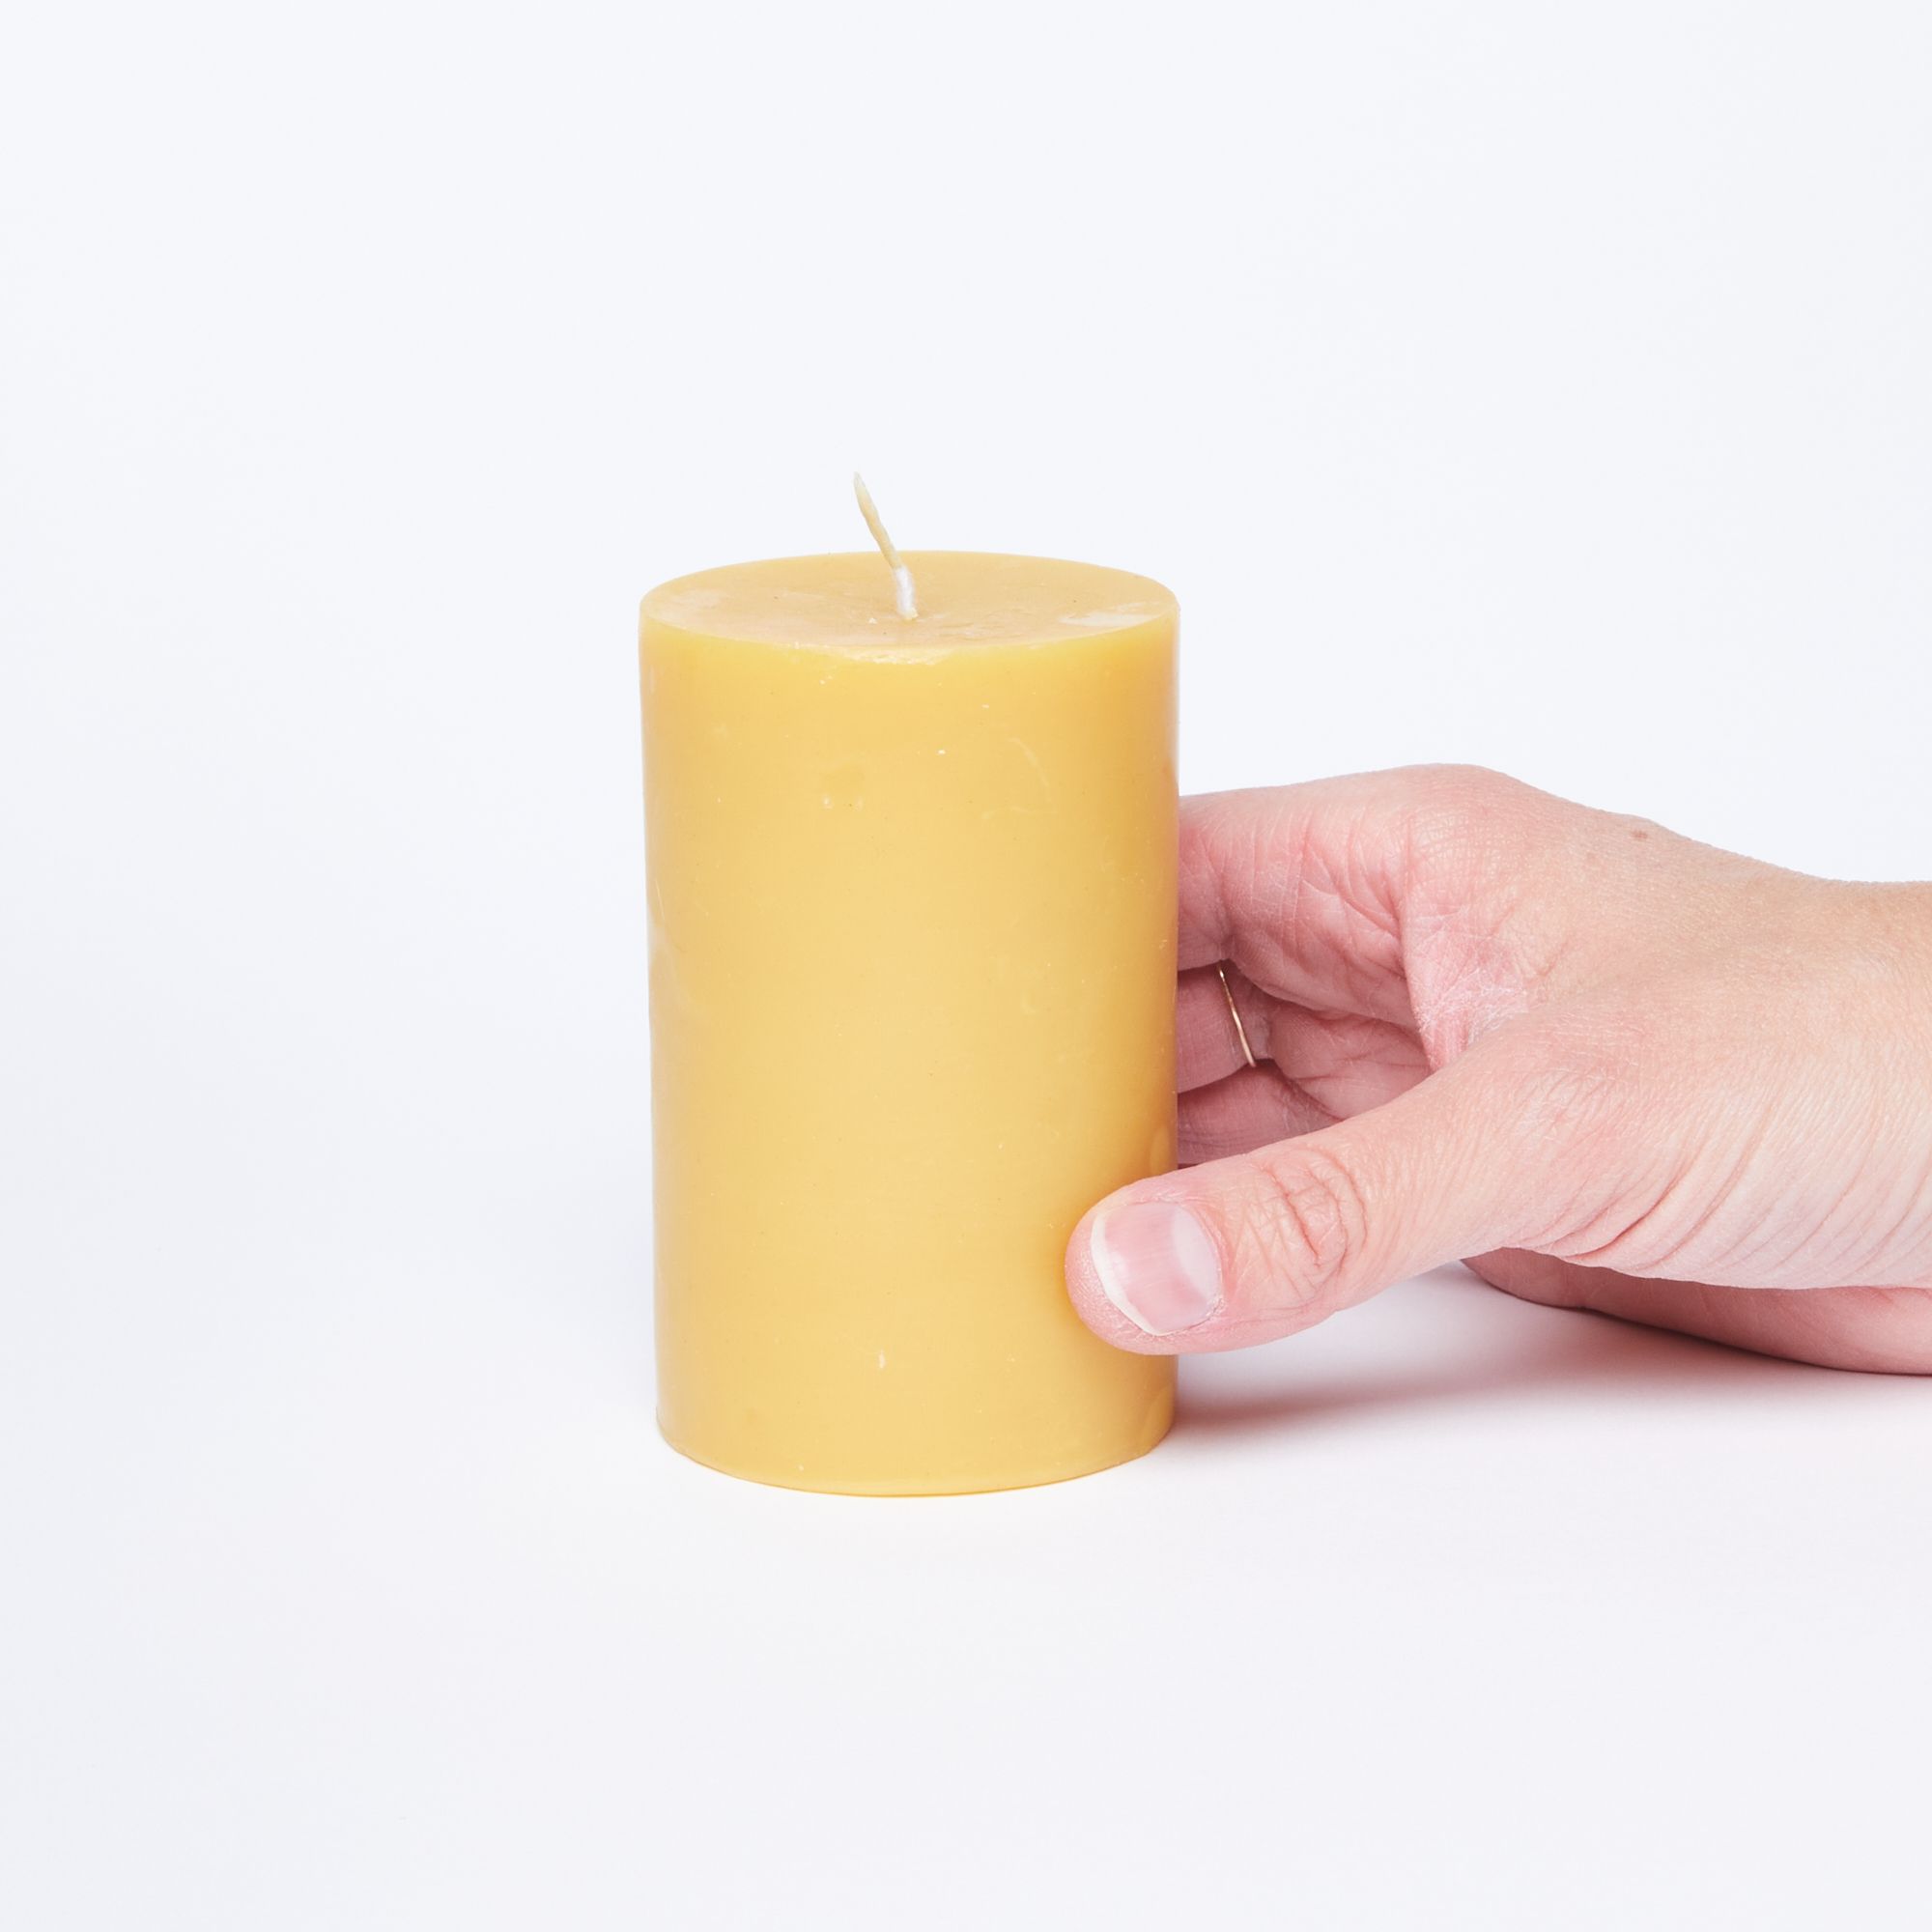 Hand holding a cylindrical yellow pillar candle